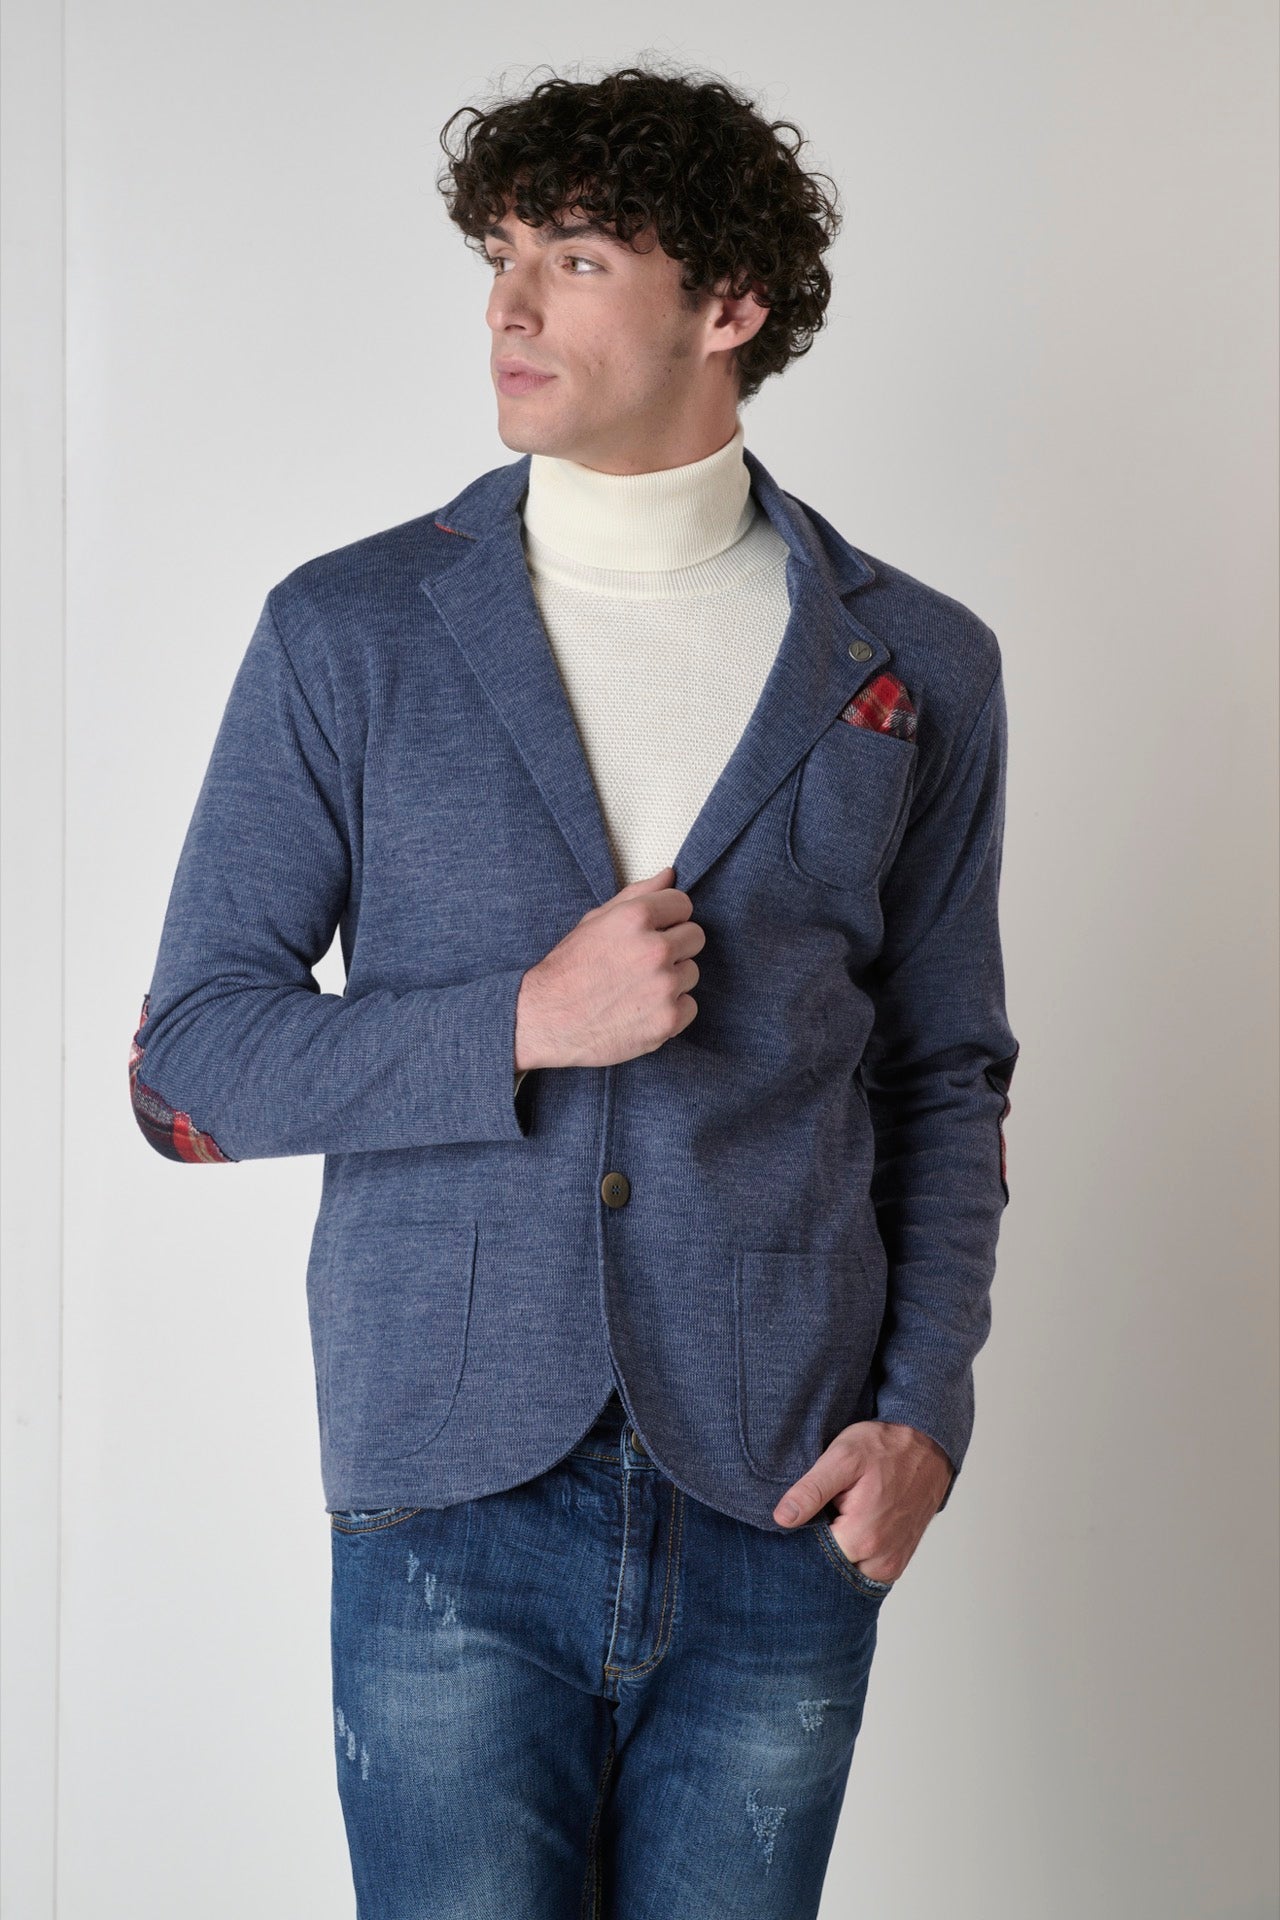 Single-breasted jeans jacket with patches, inner collar and pocket square in V2 fabric